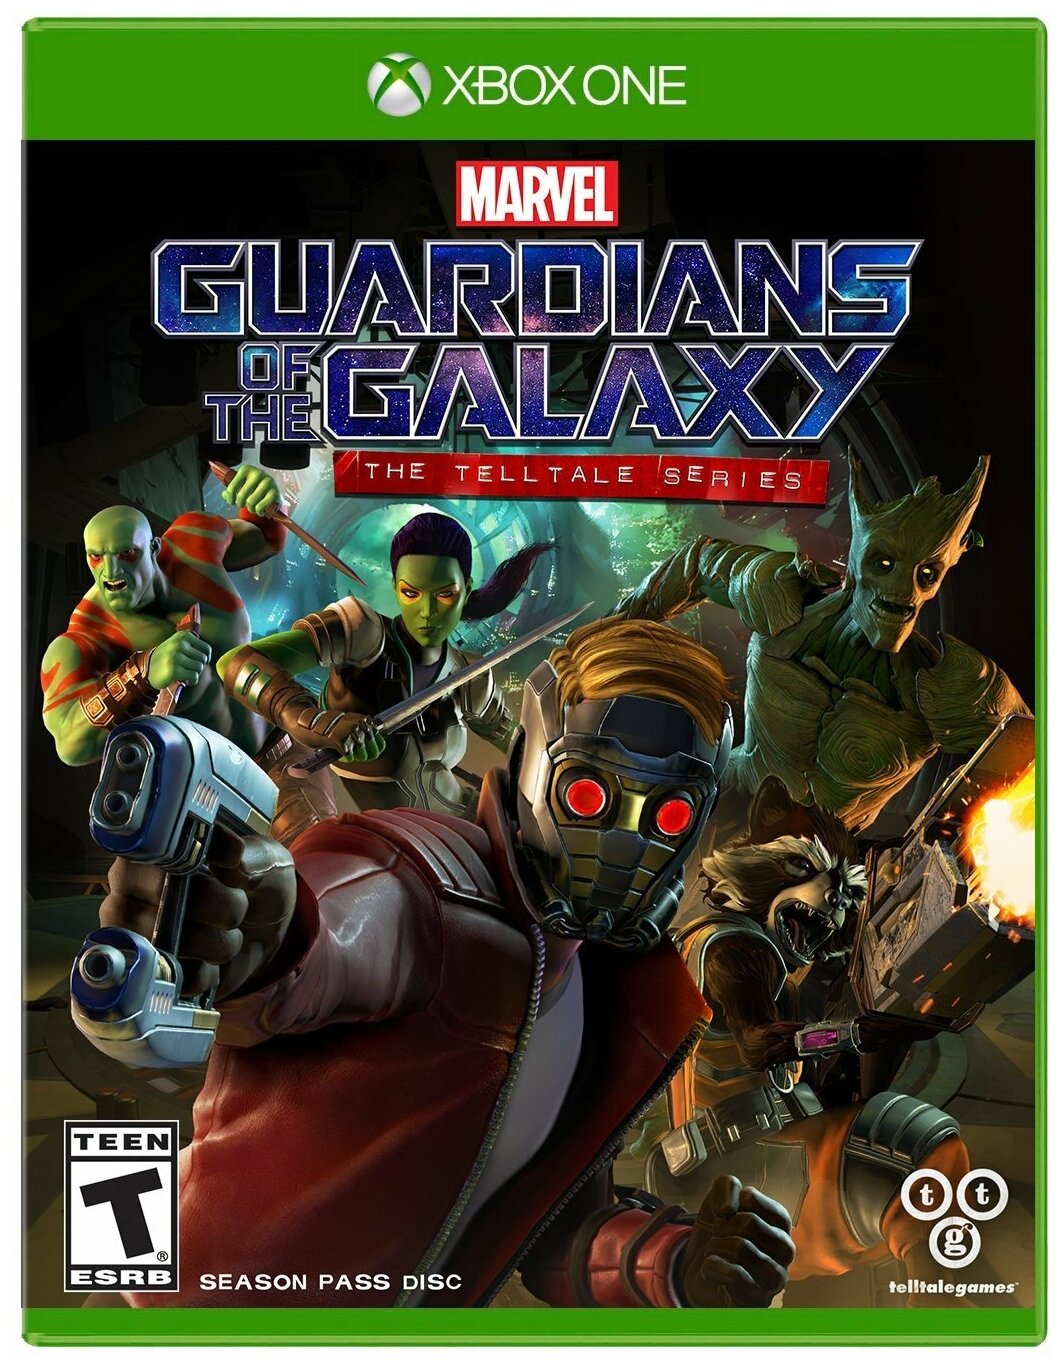 Marvel Guardian of the Galaxy: The Telltale Series (XBOX ONE РУС Уценка)